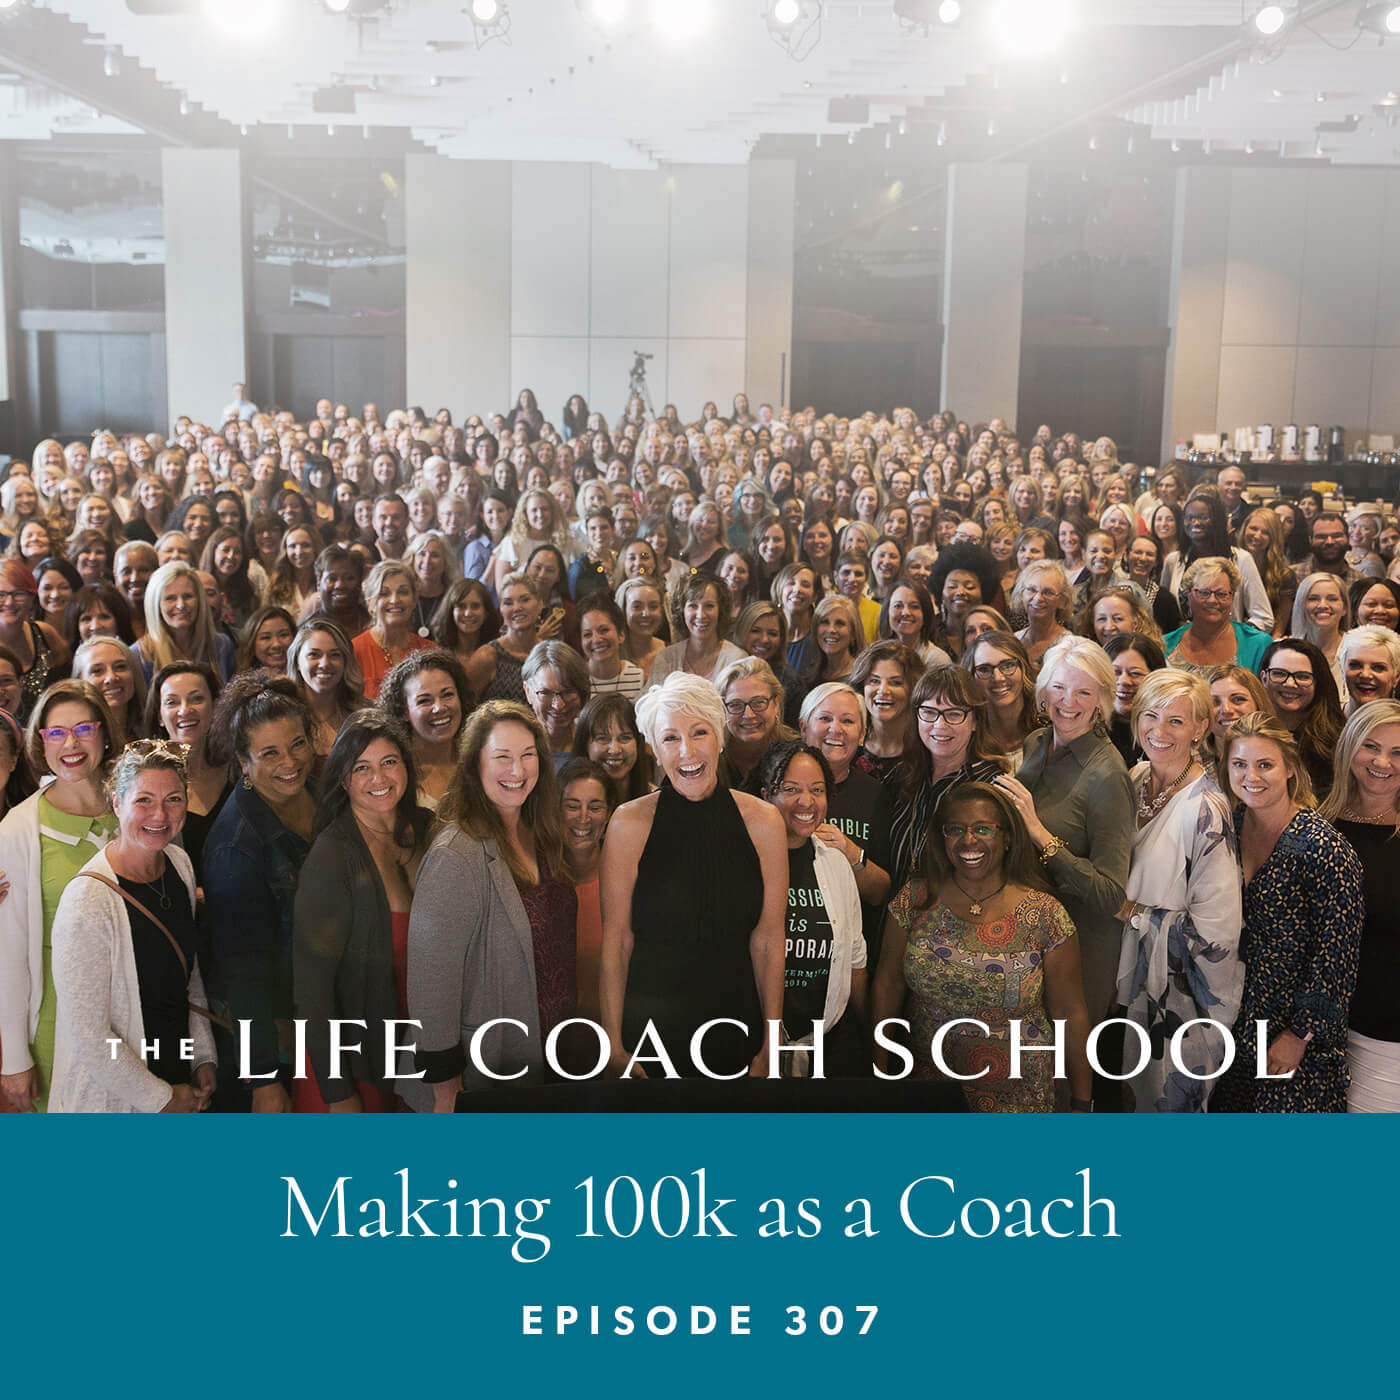 The Life Coach School Podcast with Brooke Castillo | Episode 307 | Making 100k as a Coach